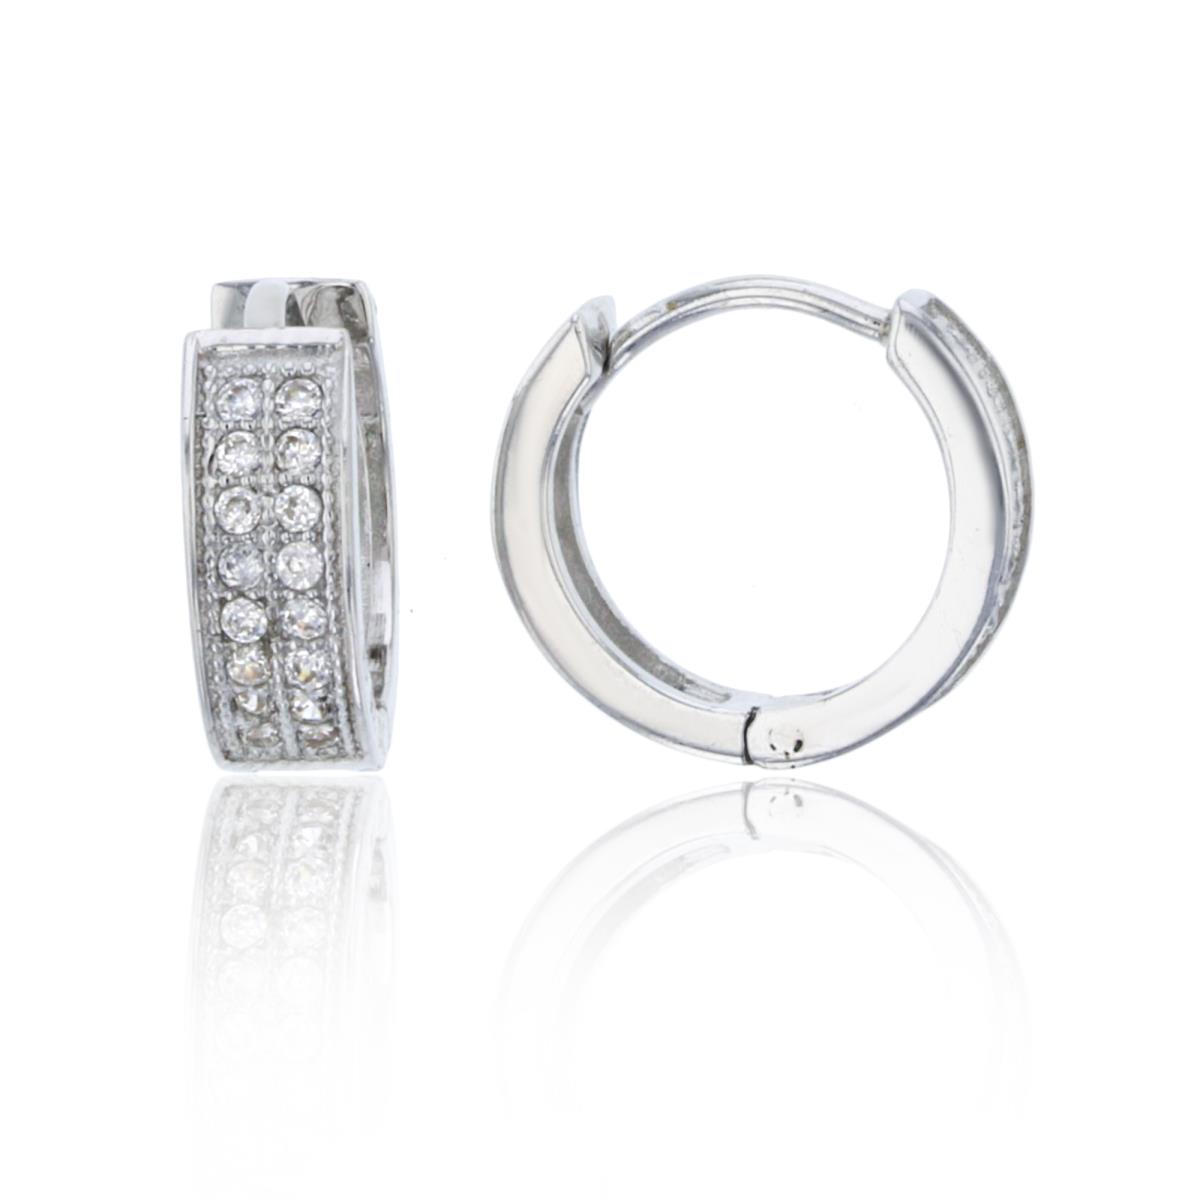 Sterling Silver 2 Row Micropave 13x4.5mm Huggie Earring